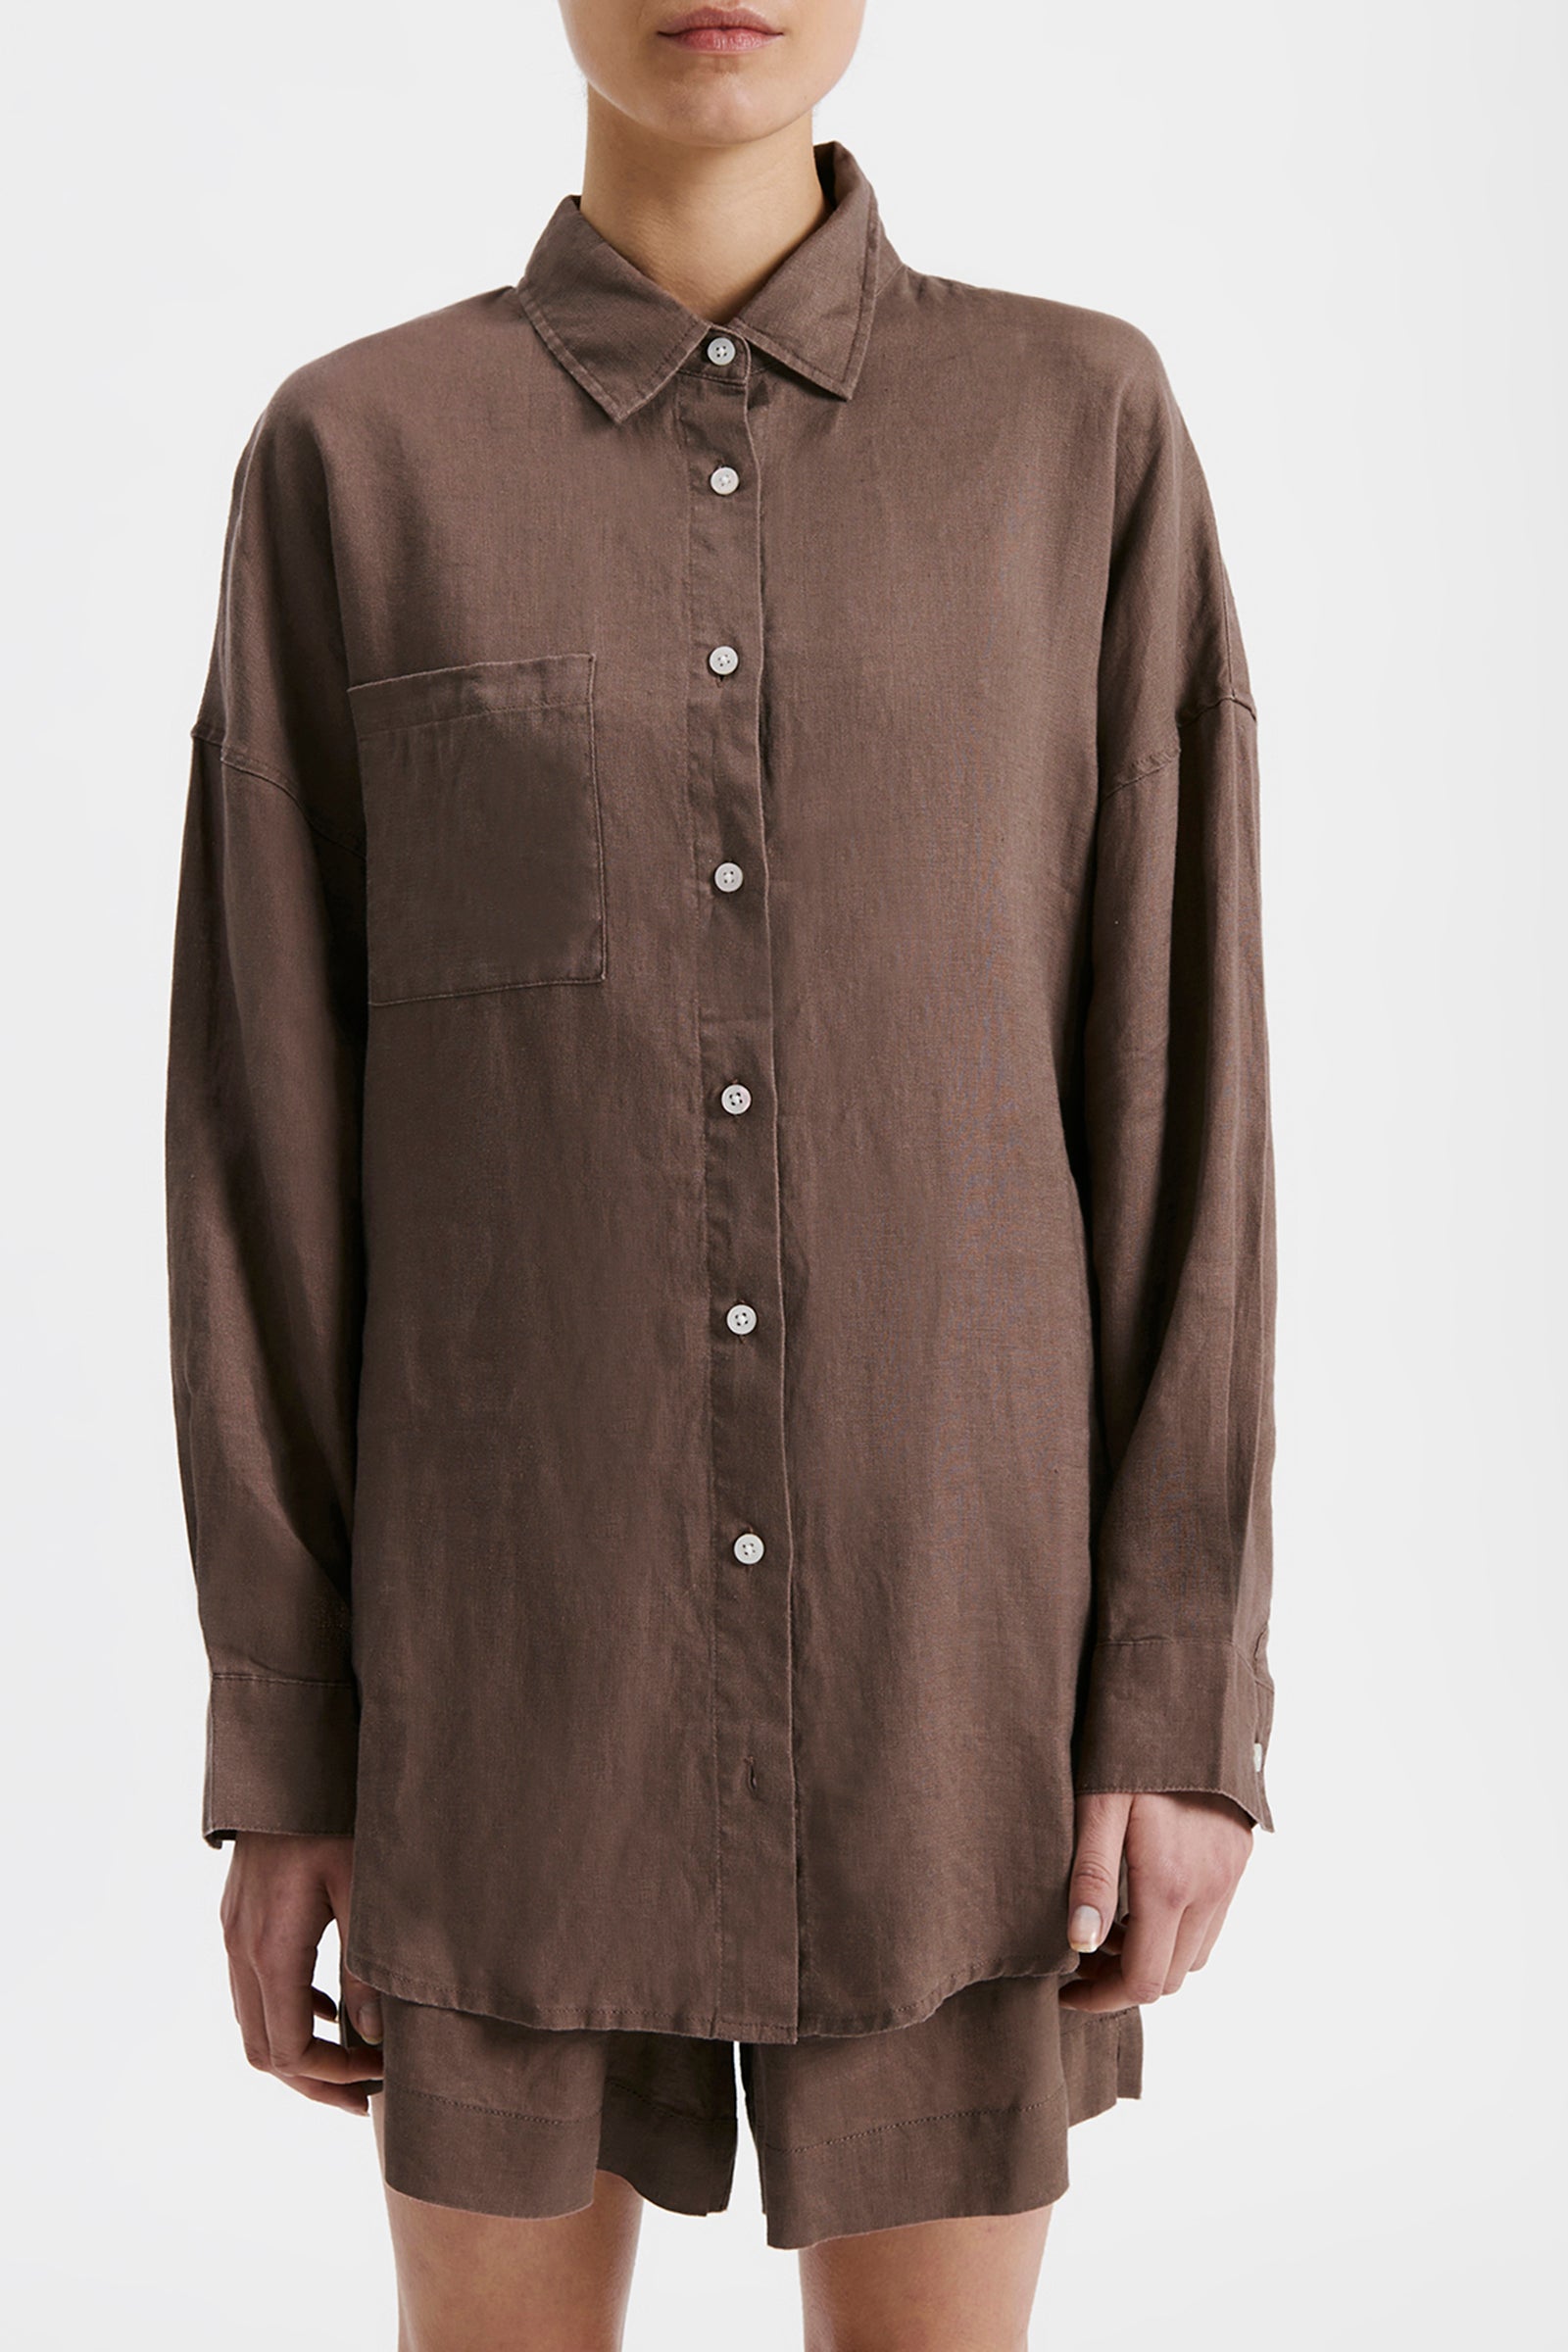 Nude Lucy Lounge Heritage Linen Shirt in Soot